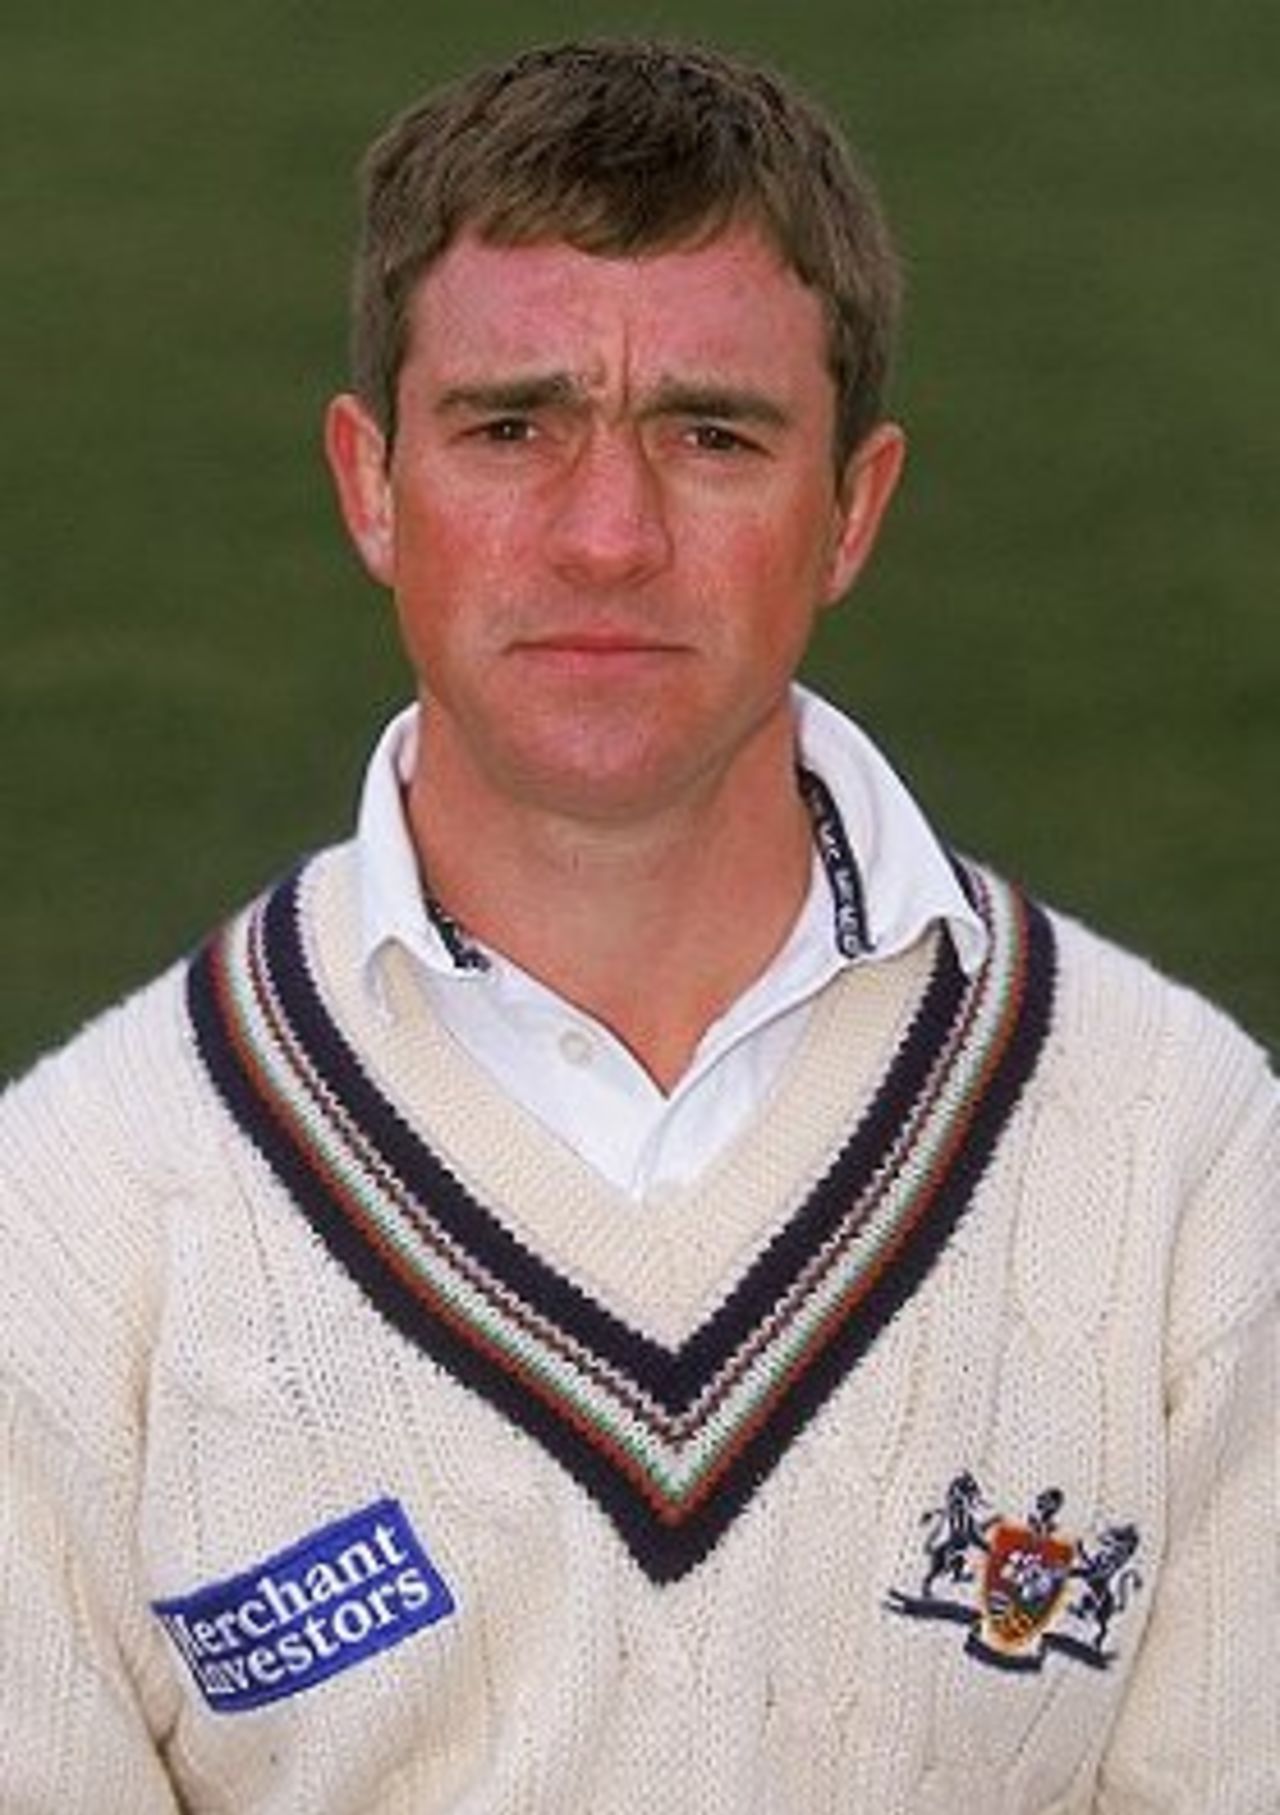 10 Apr 2000: Portrait of Tim Hancock taken during a Gloucestershire County Cricket Club photocall at Bristol in England.